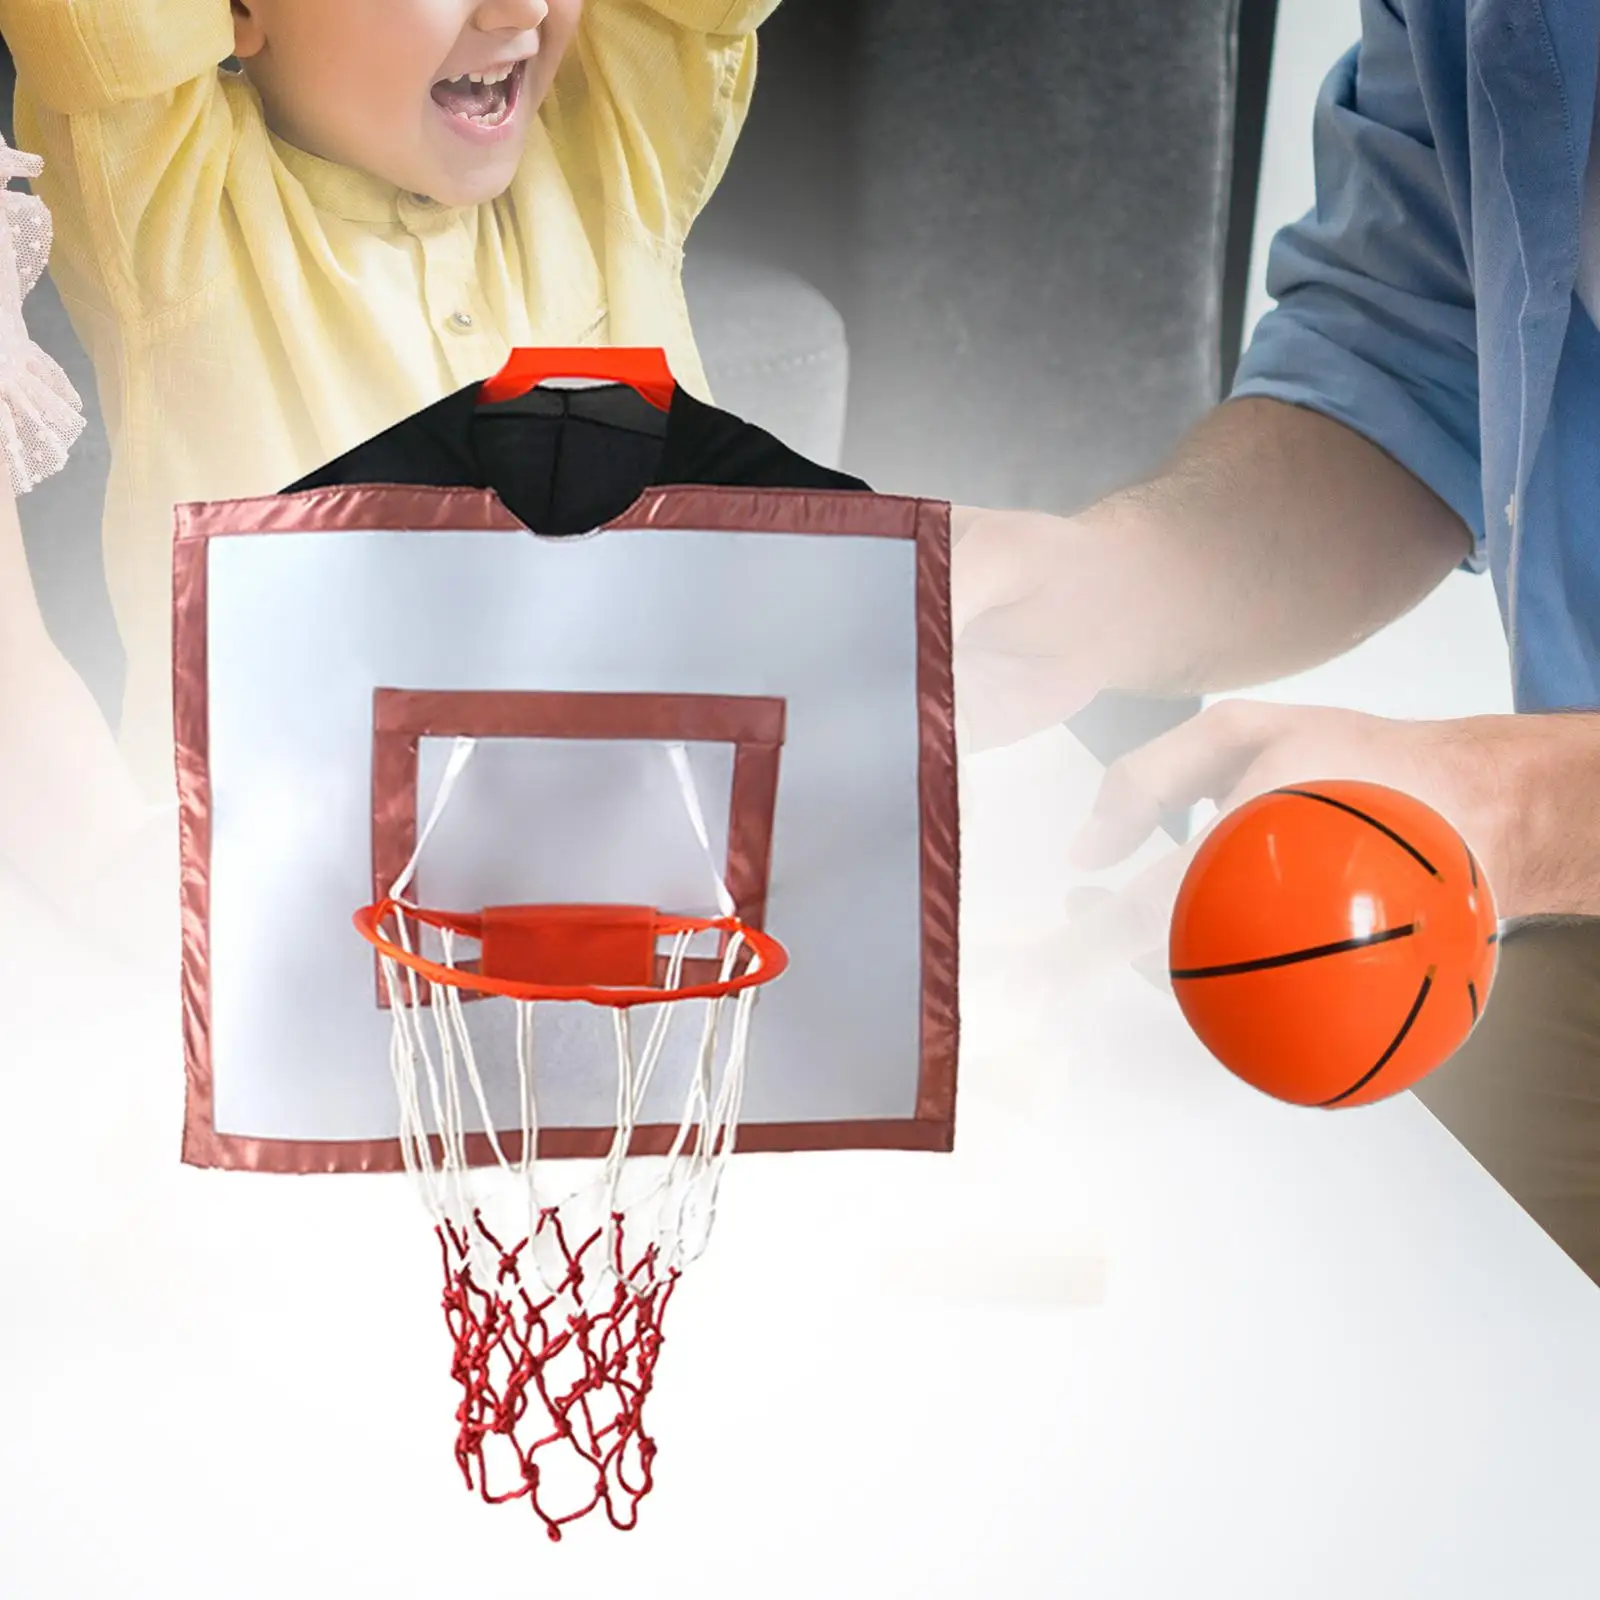 Wearable Basketball Hoop Costumes Backboard Toys Basketball Props for Boys Stage Performance Party Festival Children`s Day